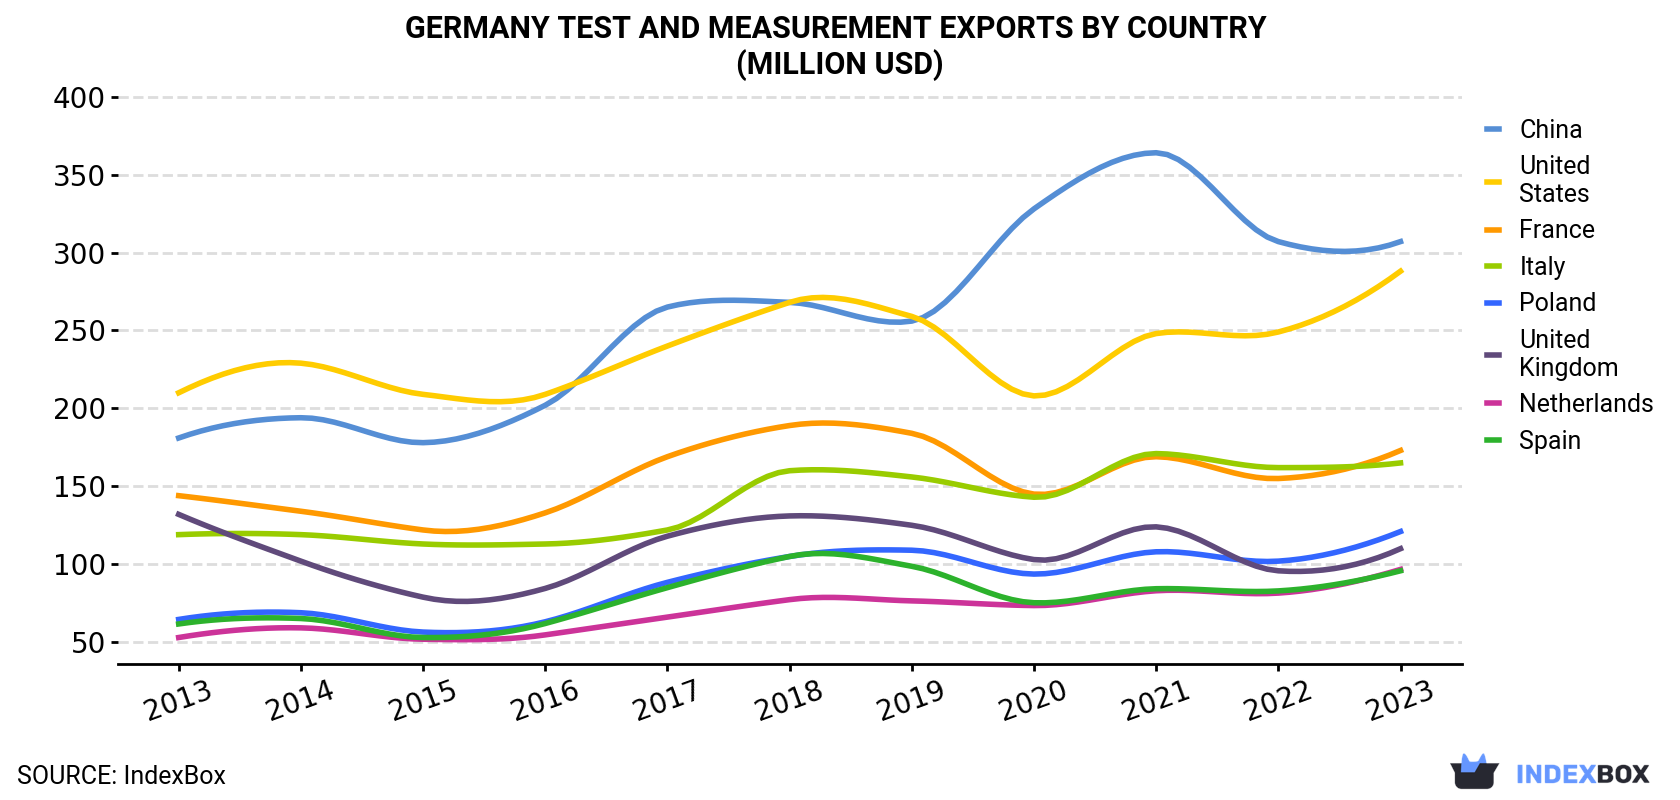 Germany Test And Measurement Exports By Country (Million USD)